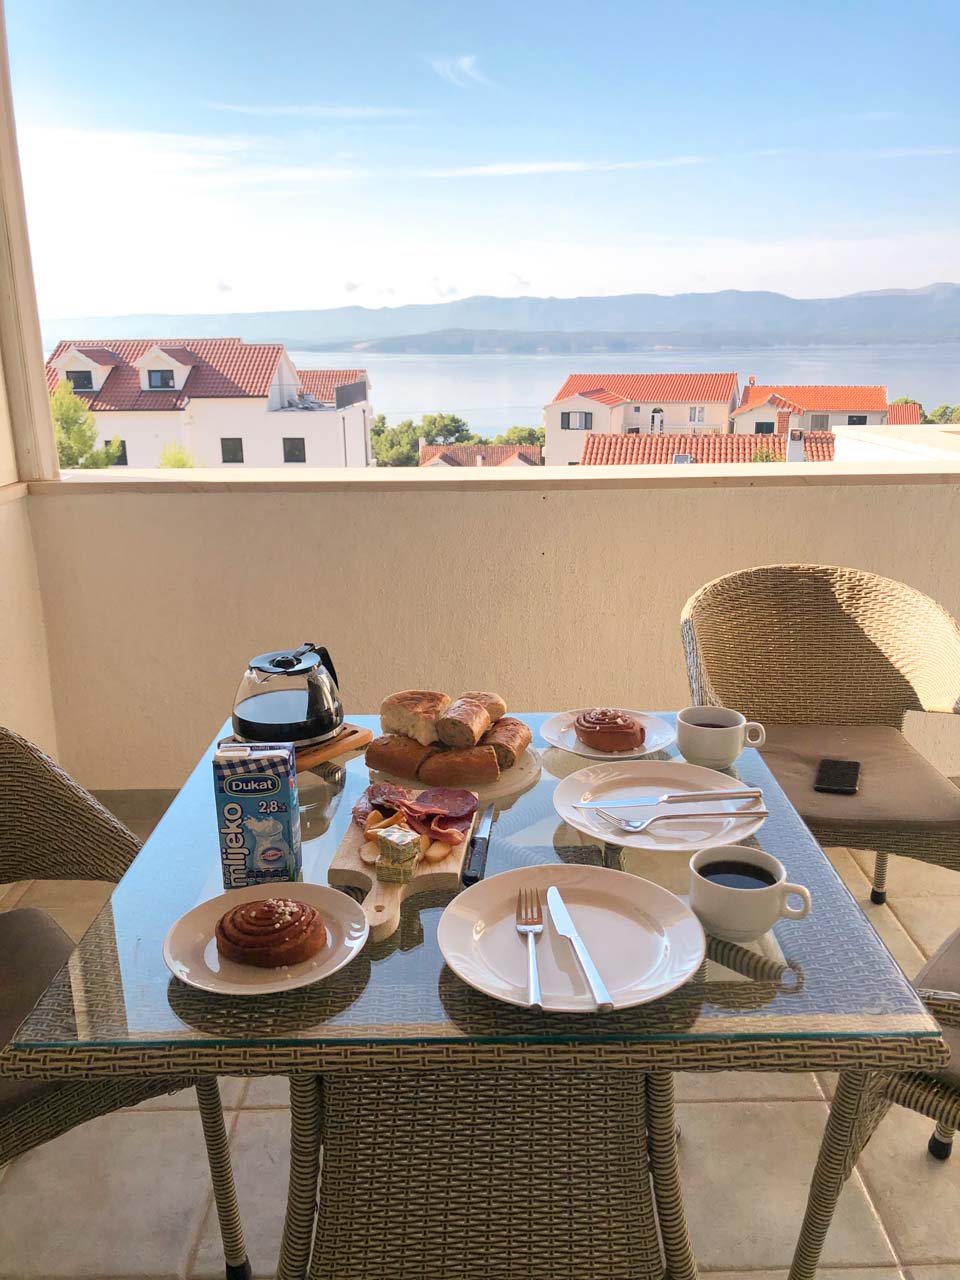 A table on an open terrace filled with different kinds of breakfast foods with the Adriatic Sea in the background